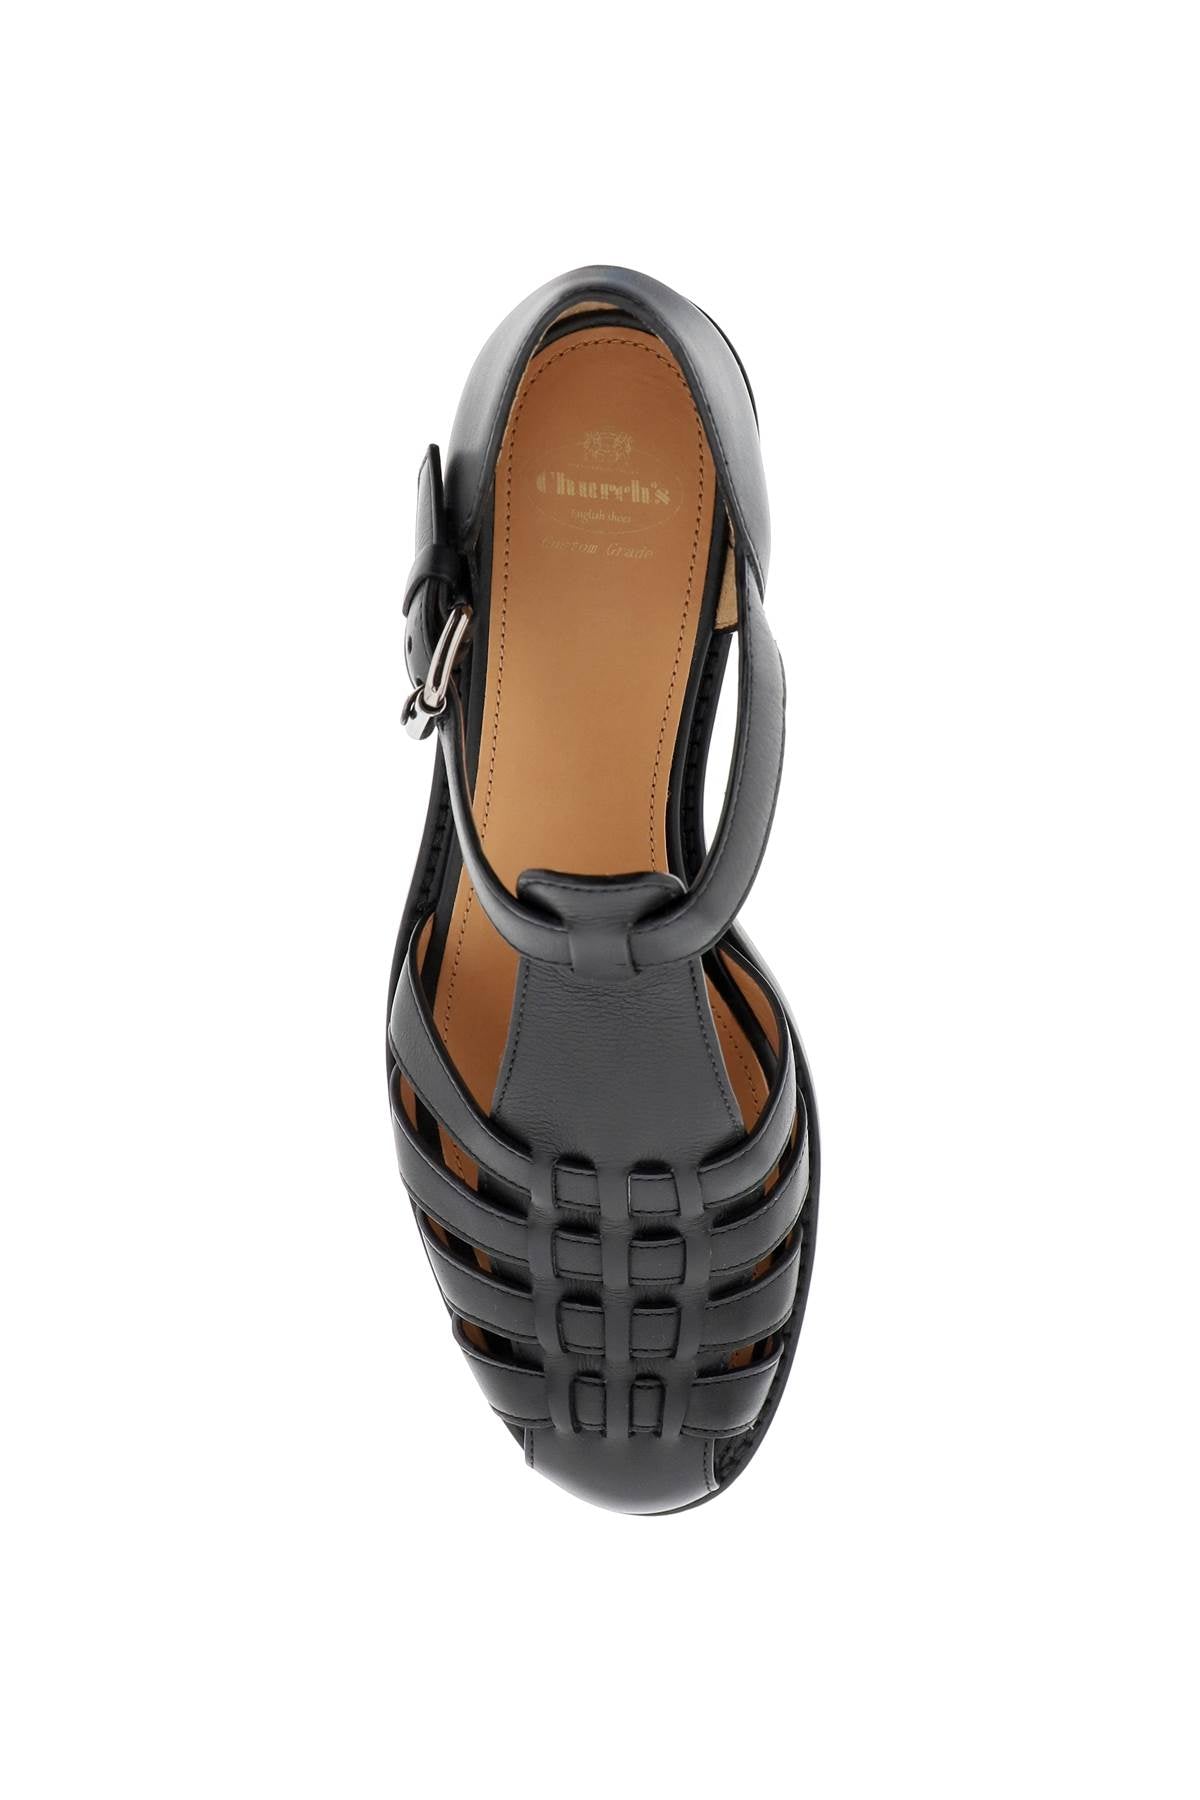 Church's kelsey cage sandals-1